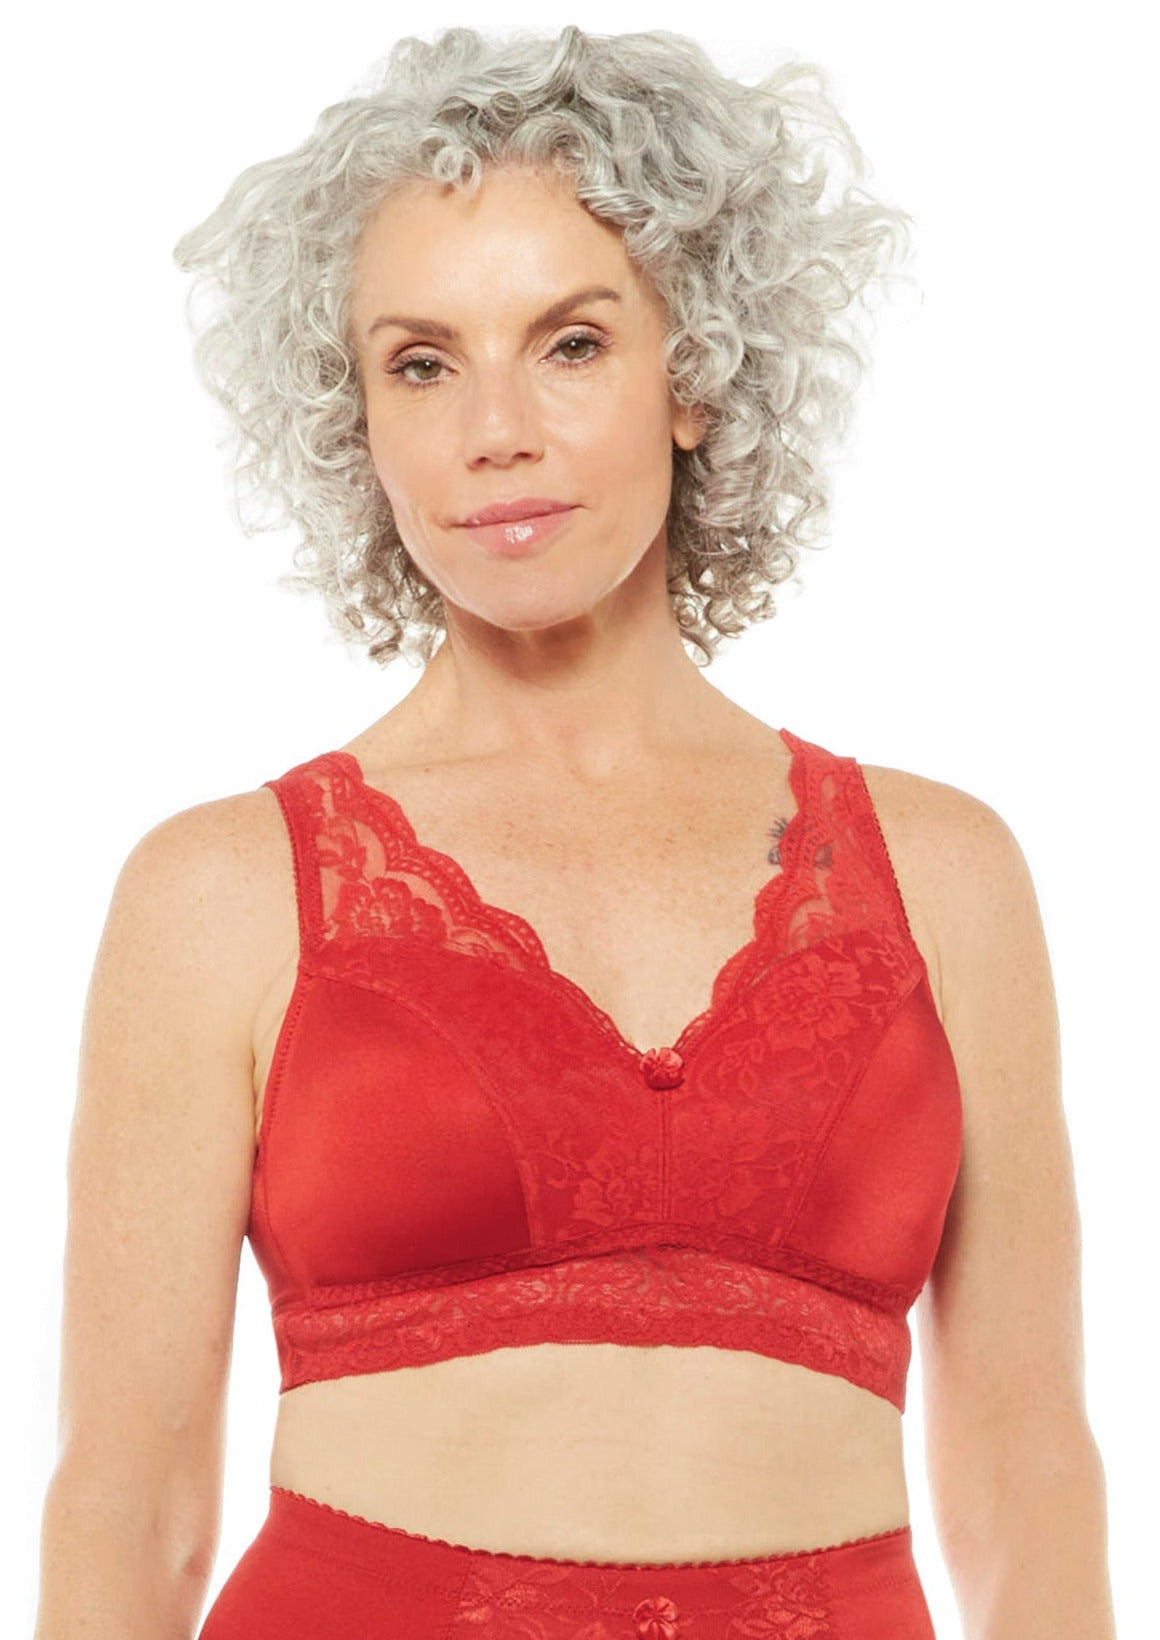 Clothing & Shoes - Socks & Underwear - Bras - Rhonda Shear Curve Envy Pin Up  Bra (2-Pack) - Online Shopping for Canadians